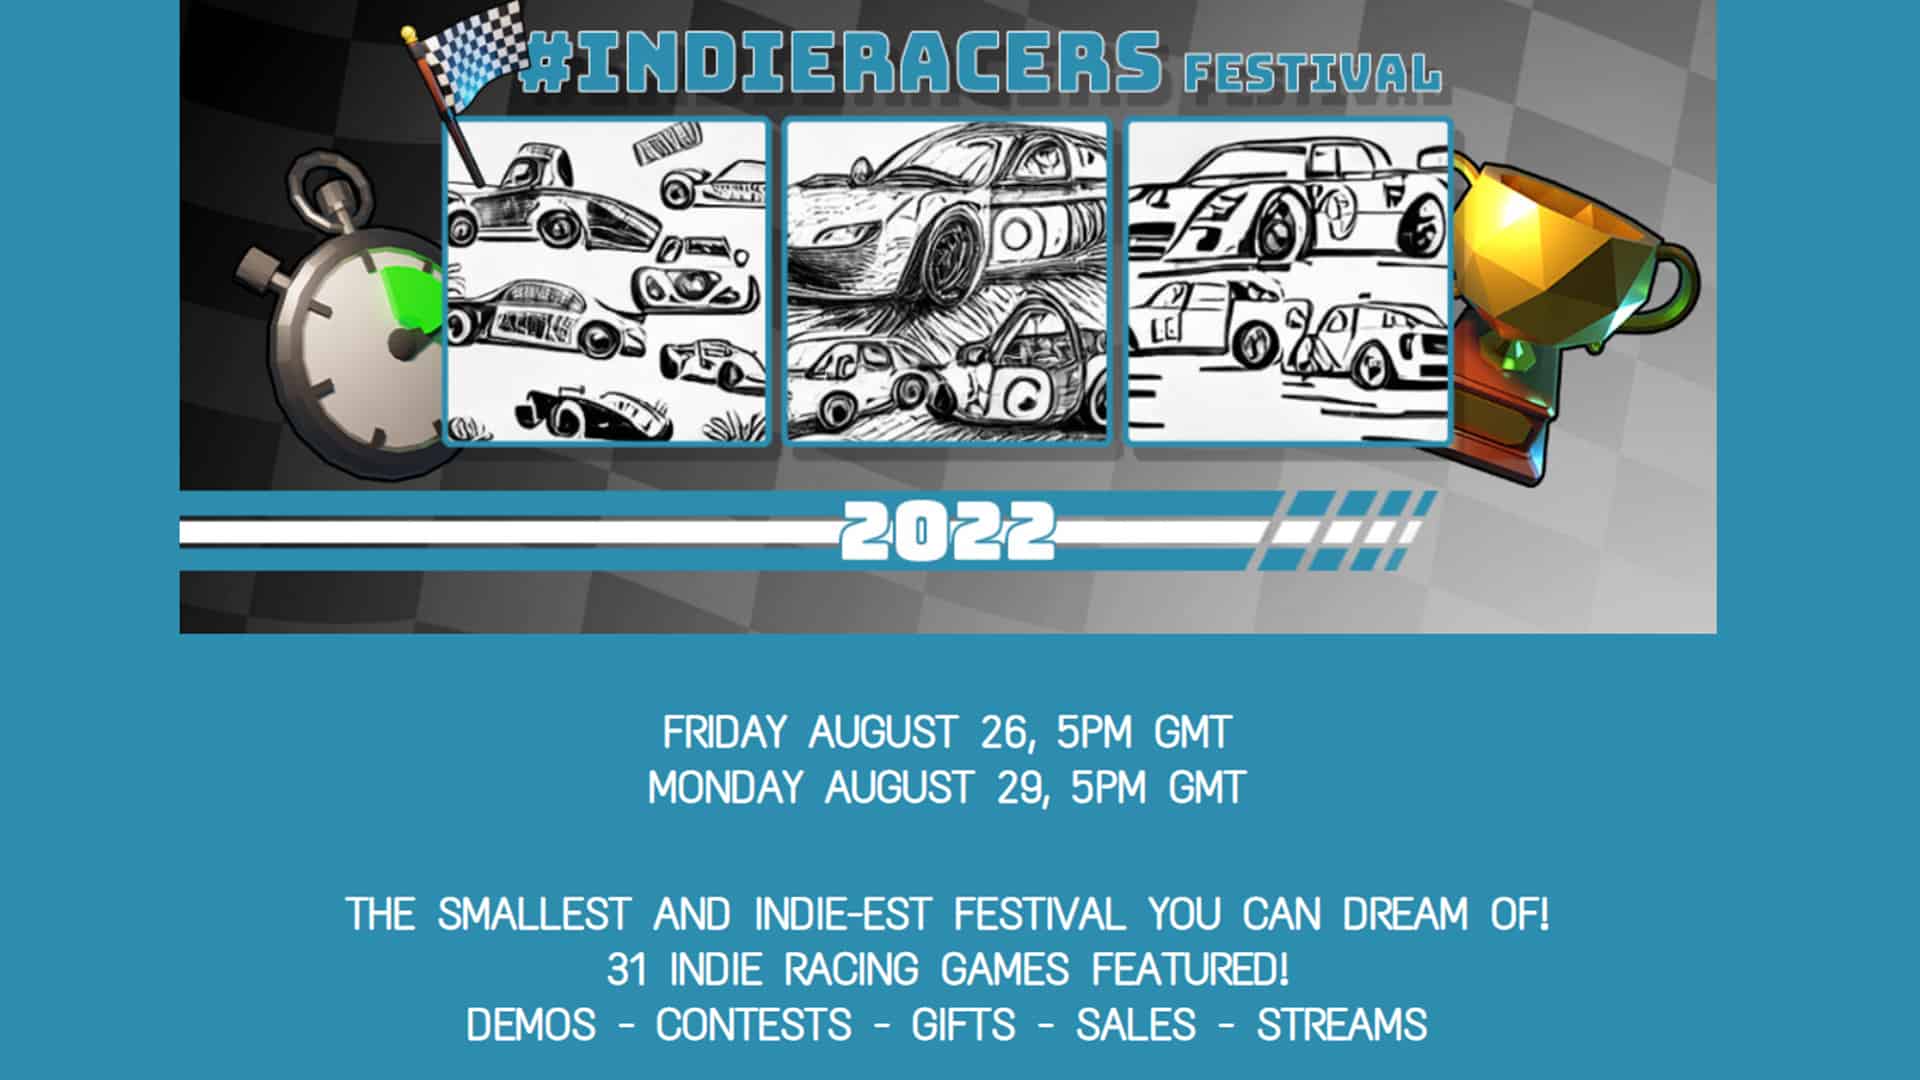 Indie Racers Festival set to showcase the best of the indie racing scene this weekend